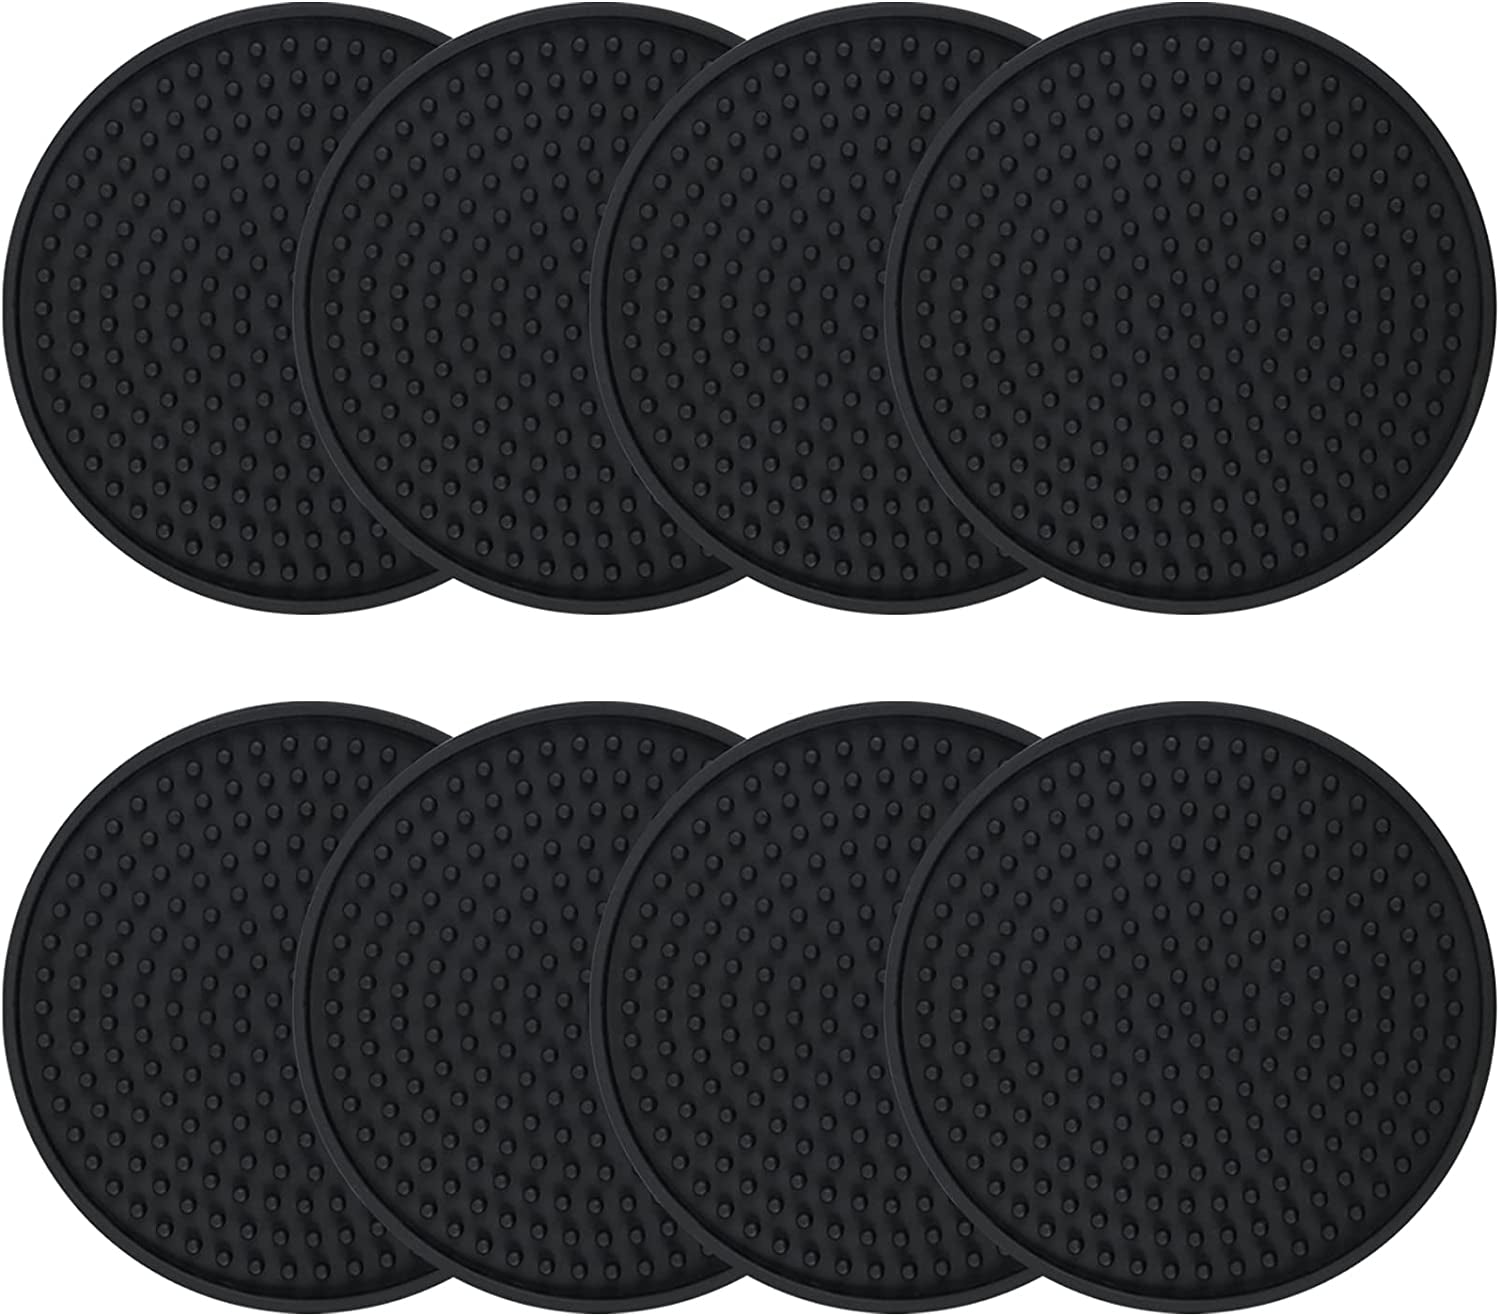 Coasters for Drinks , Perfect Silicone Drink Coasters Set of 8, Non-Stick Black Coasters for Coffee Table, Wooden Table, Heat Resistant Coaster Set with Deep Grooved, Coasters Fit All Cups